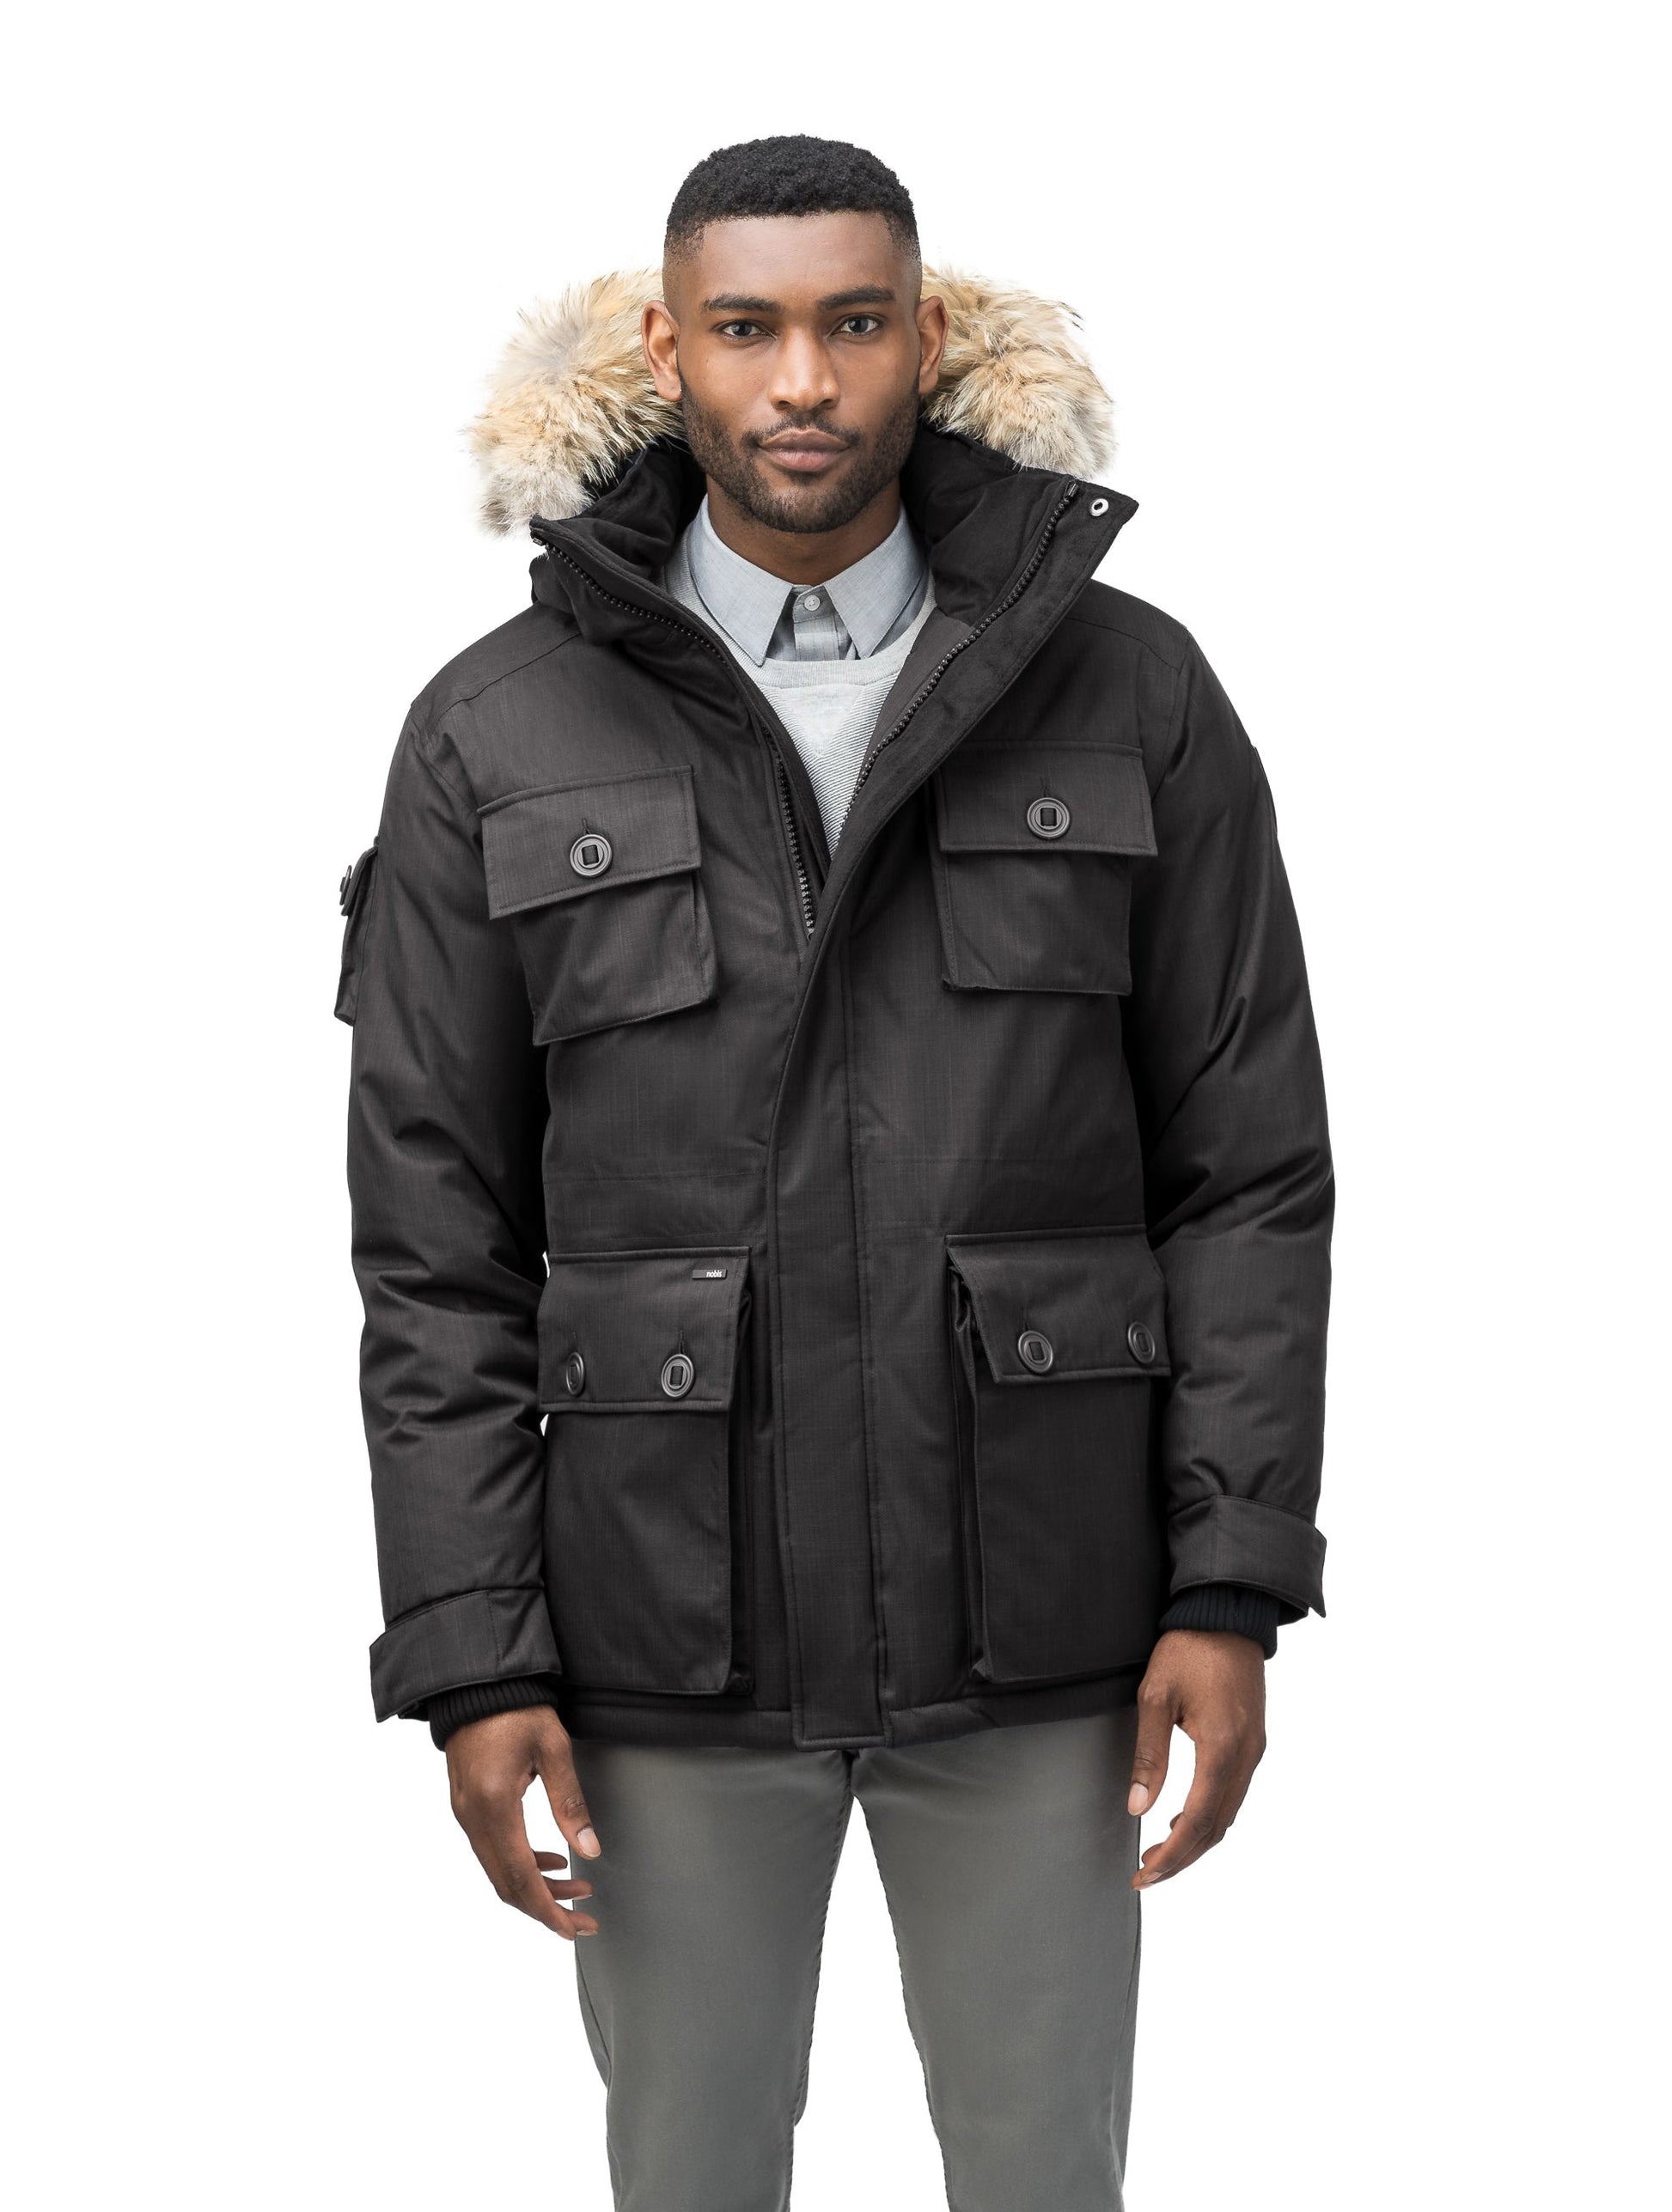 Men's down filled parka with four patch pockets and an adjustable waist with removable hood and removable fur trim in CH Black